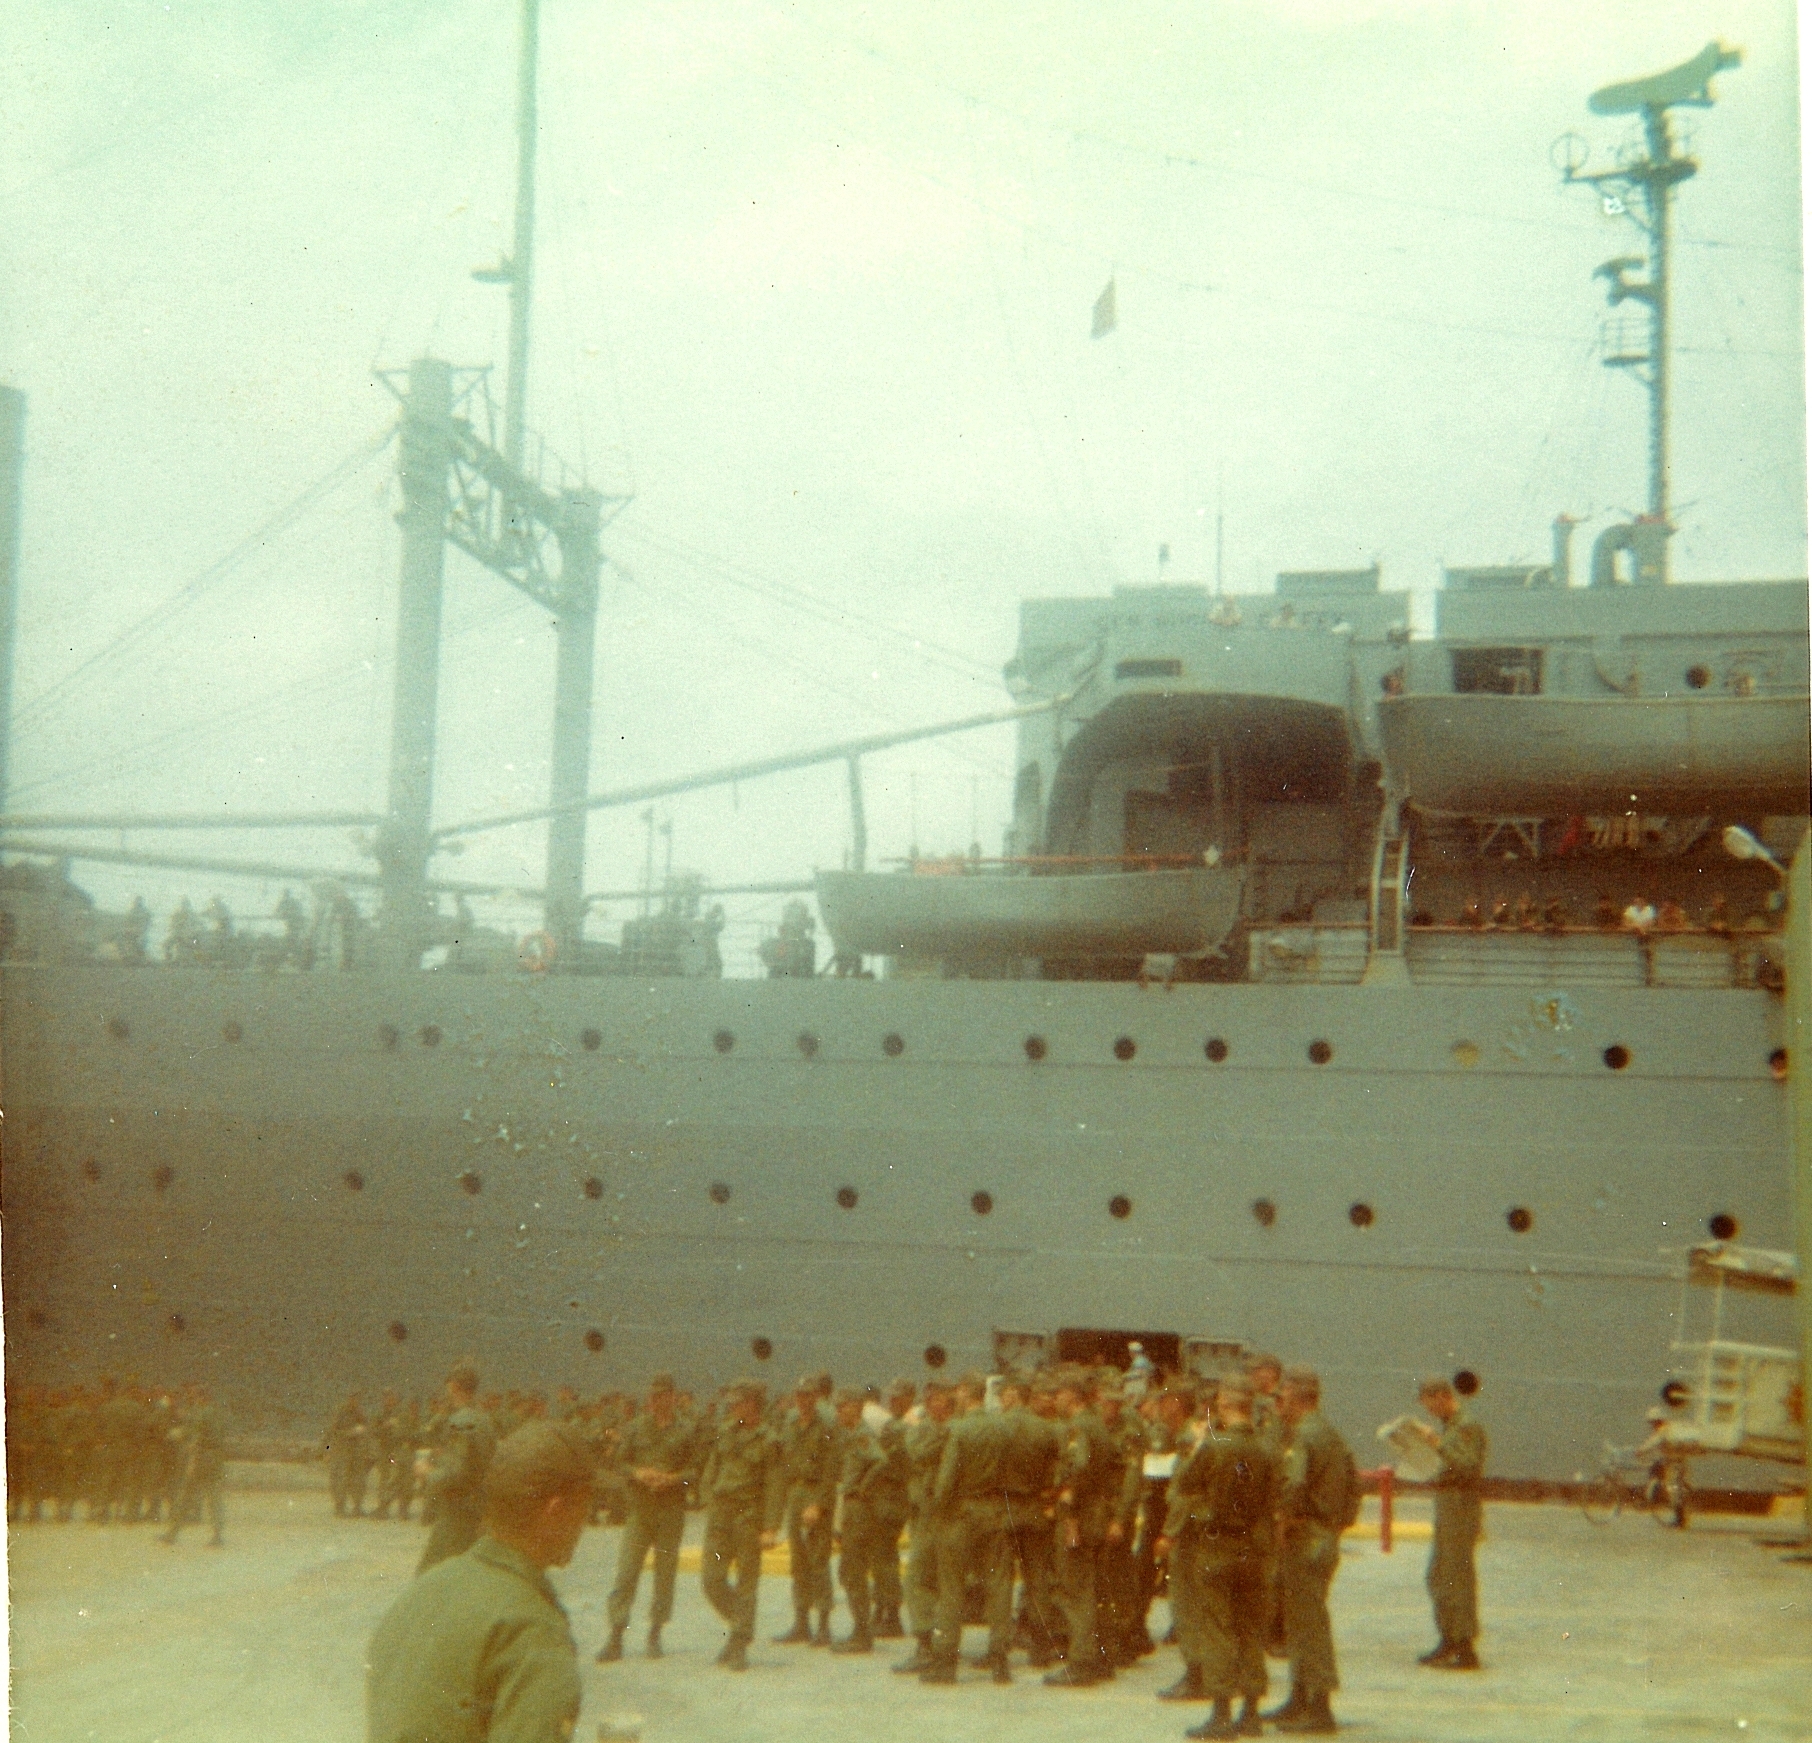 Soldiers board the USNS Gaffey on August 2nd 1966